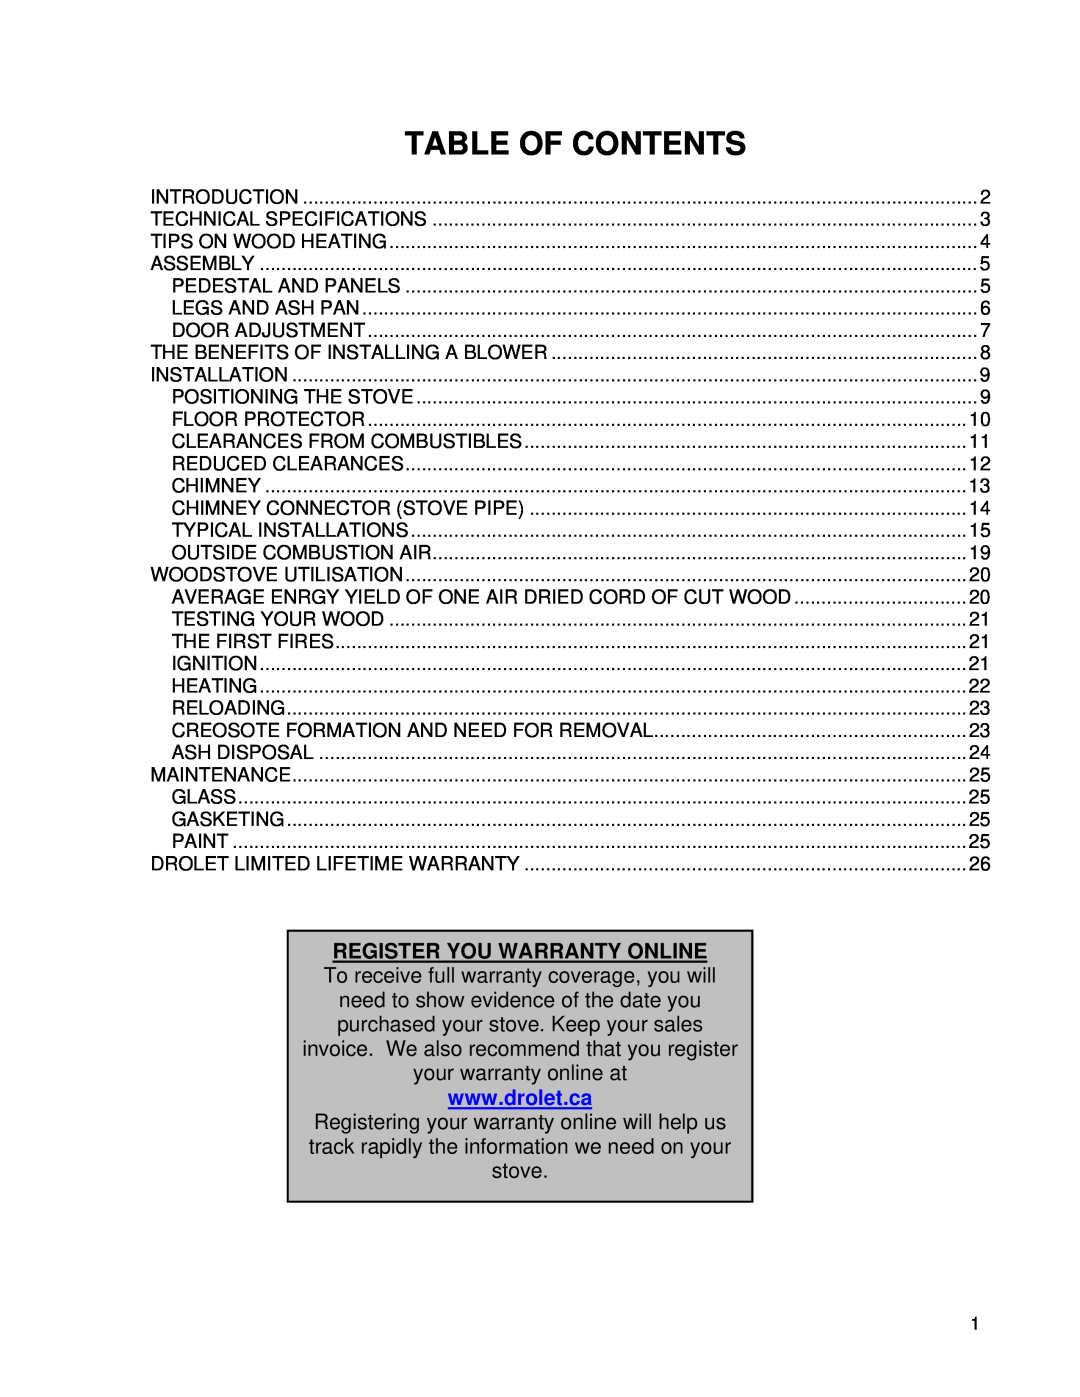 Drolet WOODSTOVES owner manual Table Of Contents 